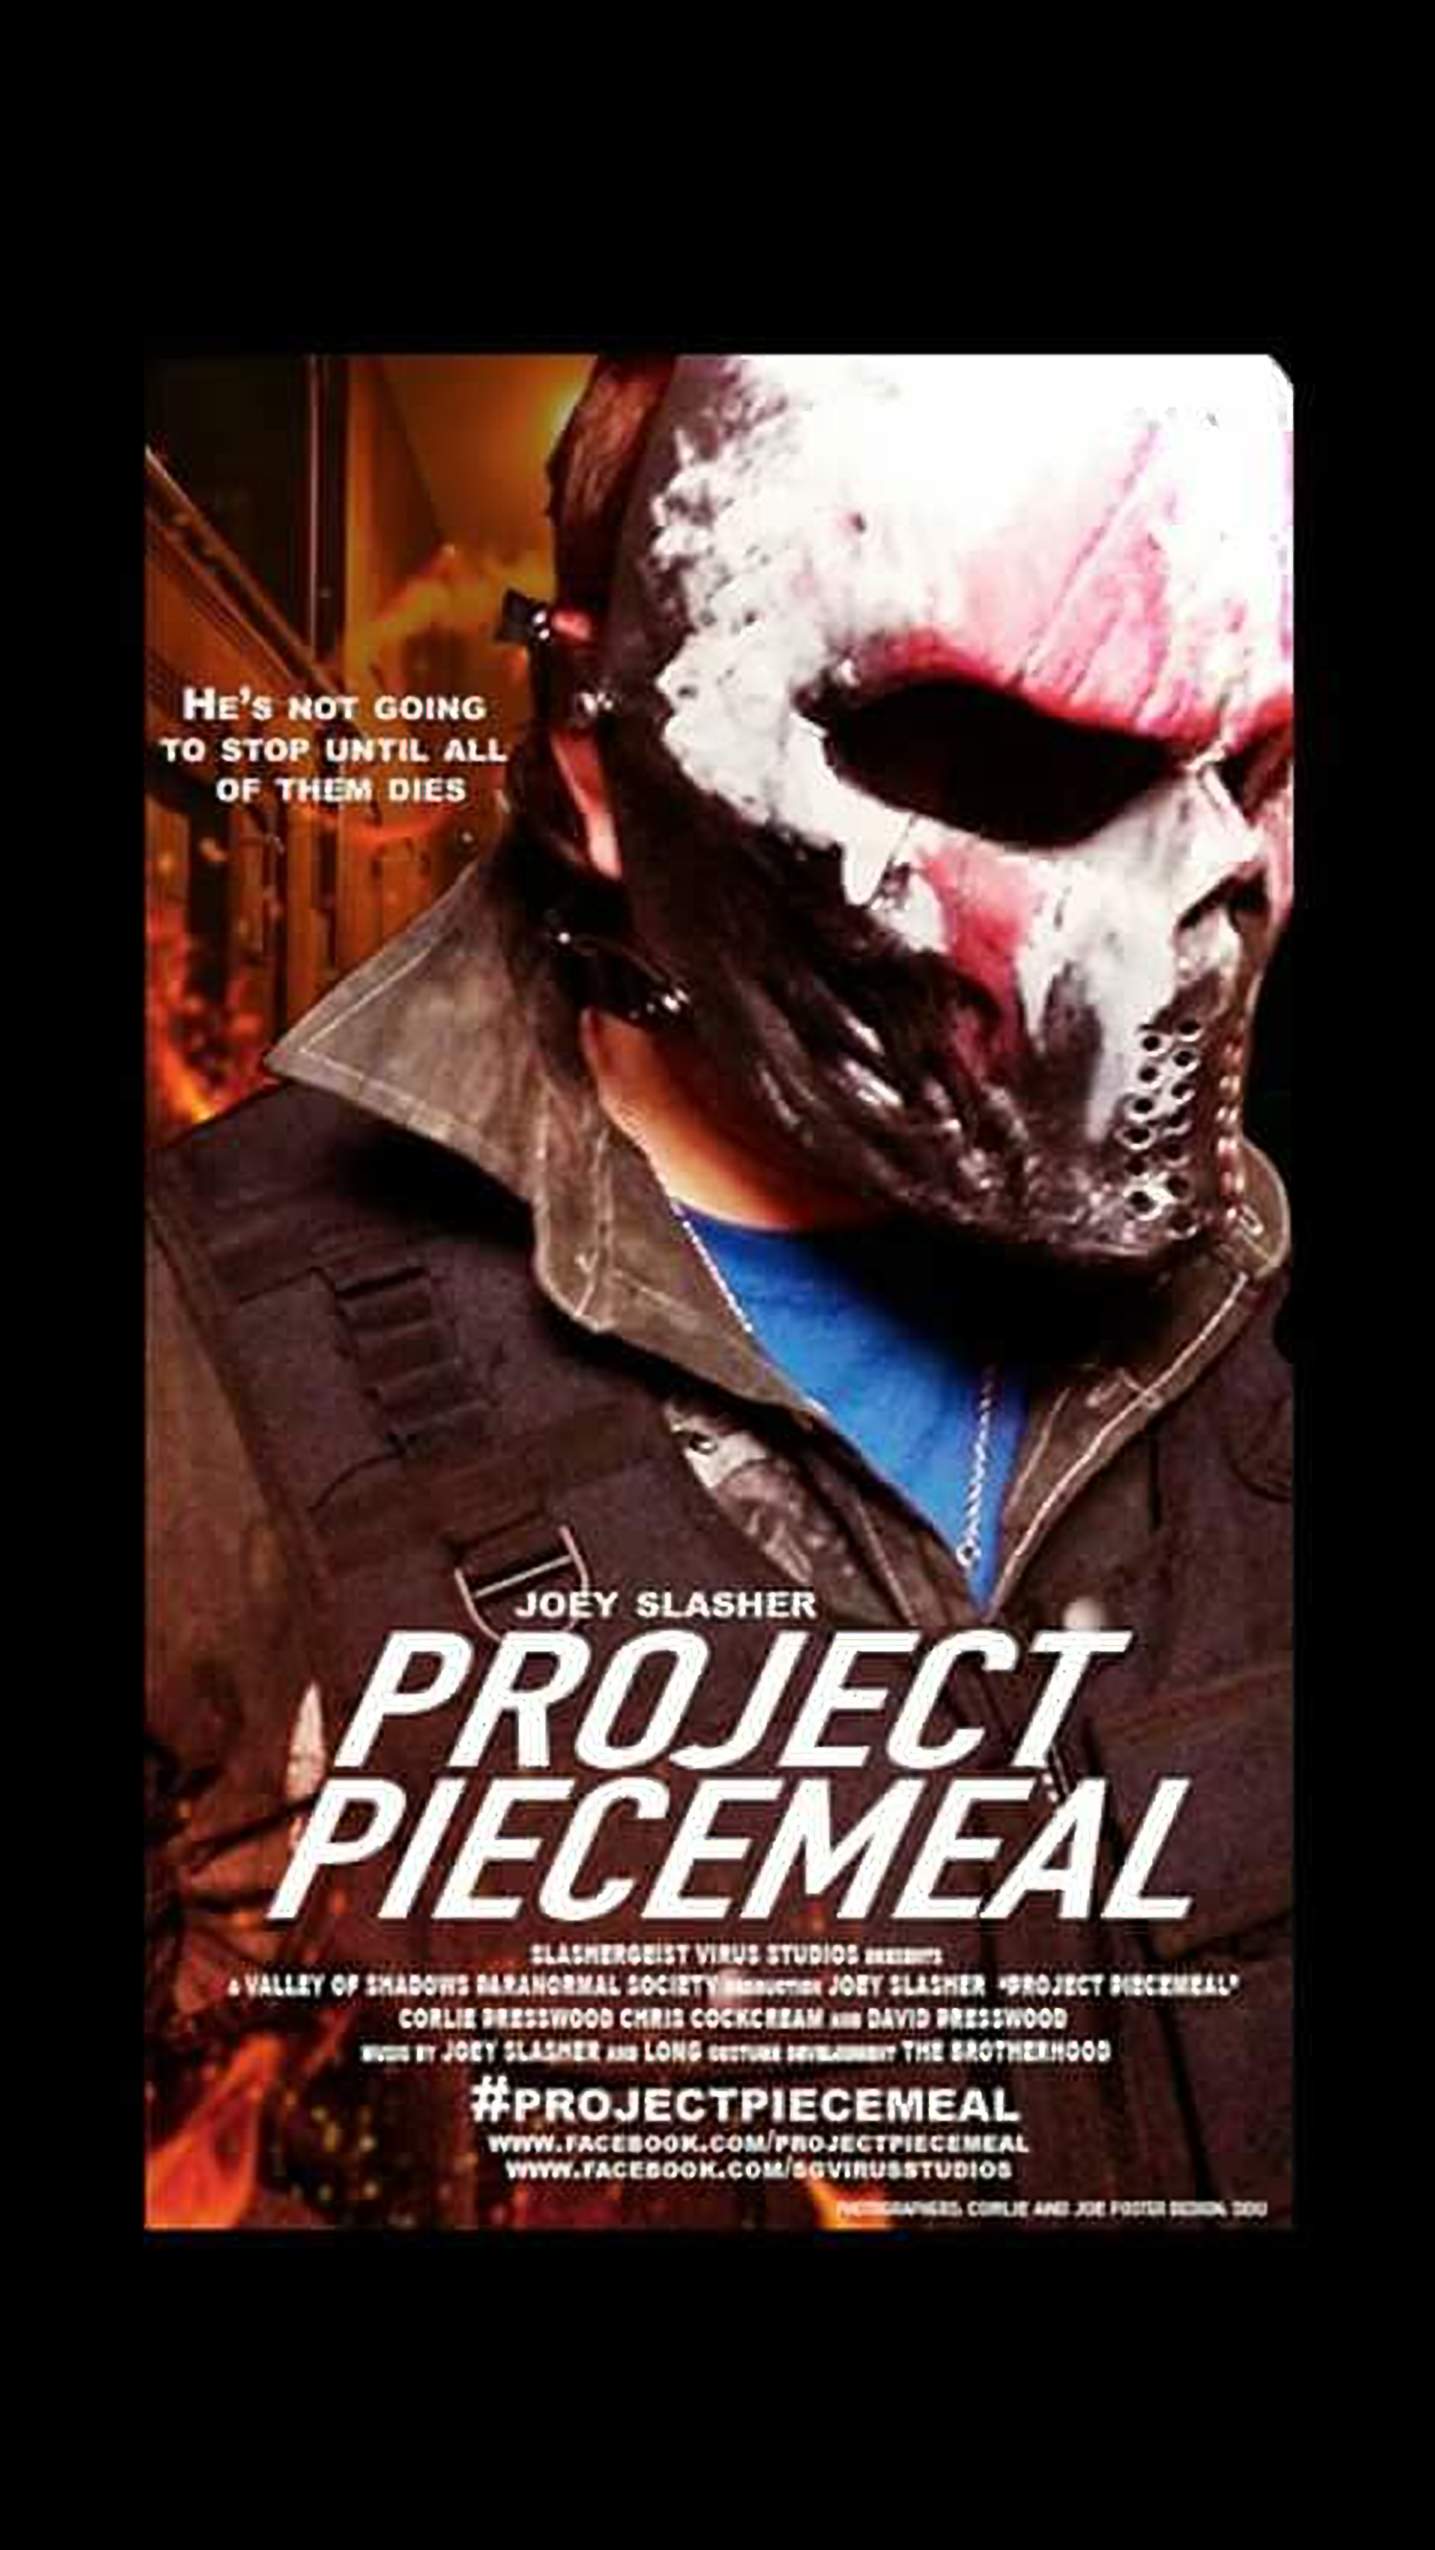 Project Piecemeal